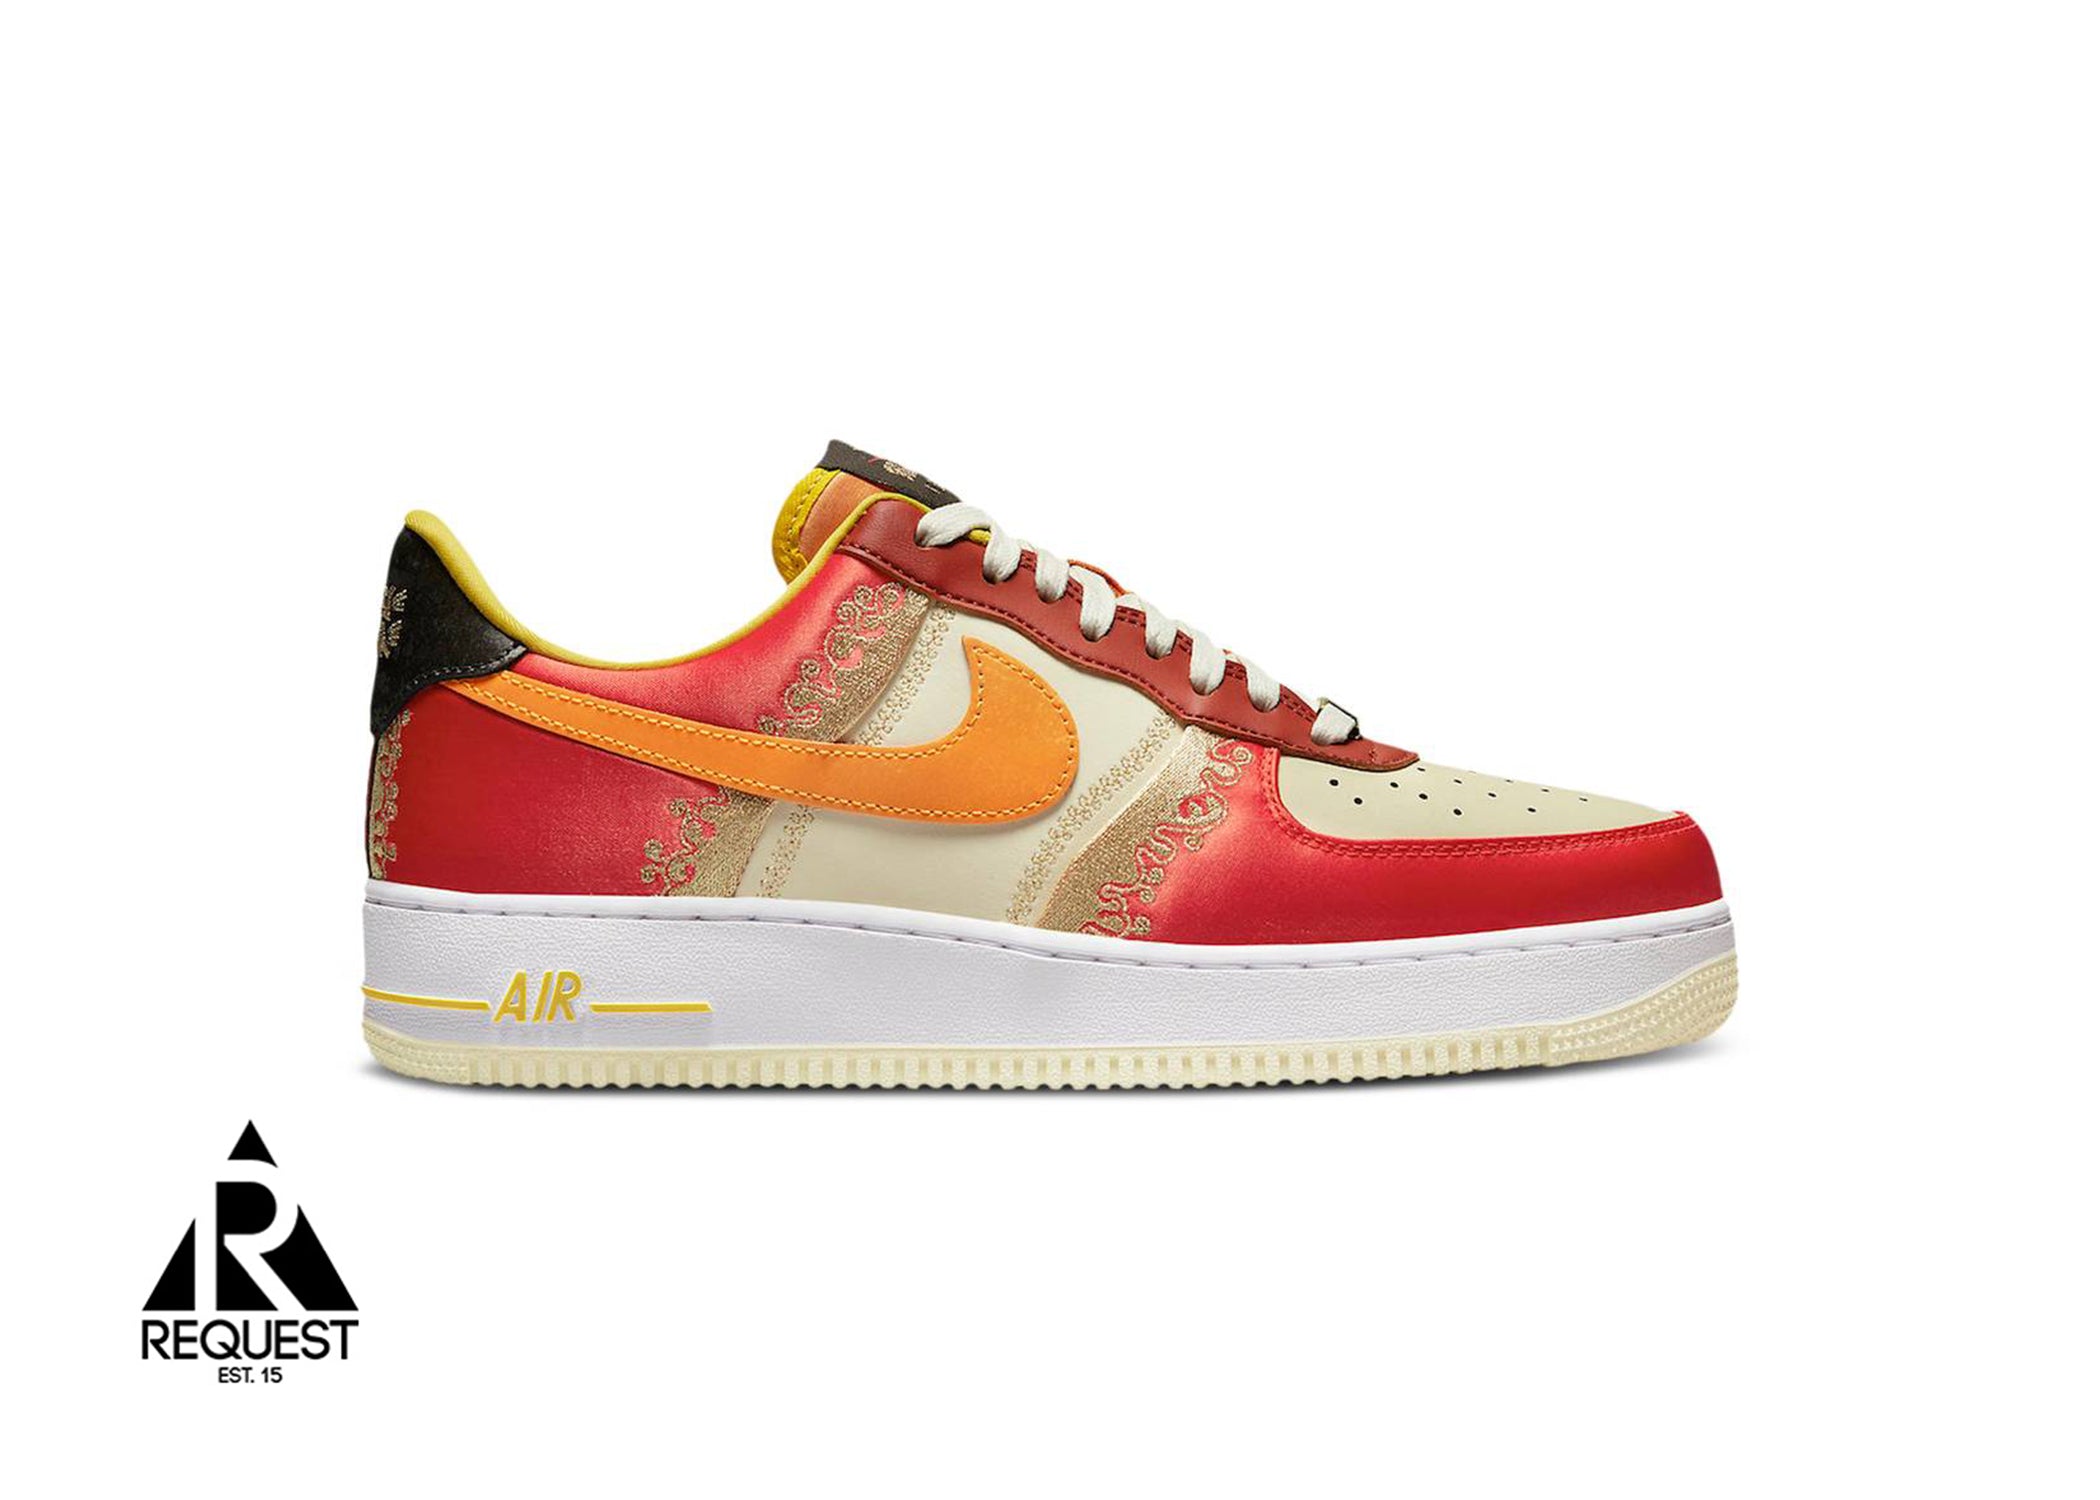 Nike Air Force 1 Low Premium '07 LV8 "Little Accra" (W)